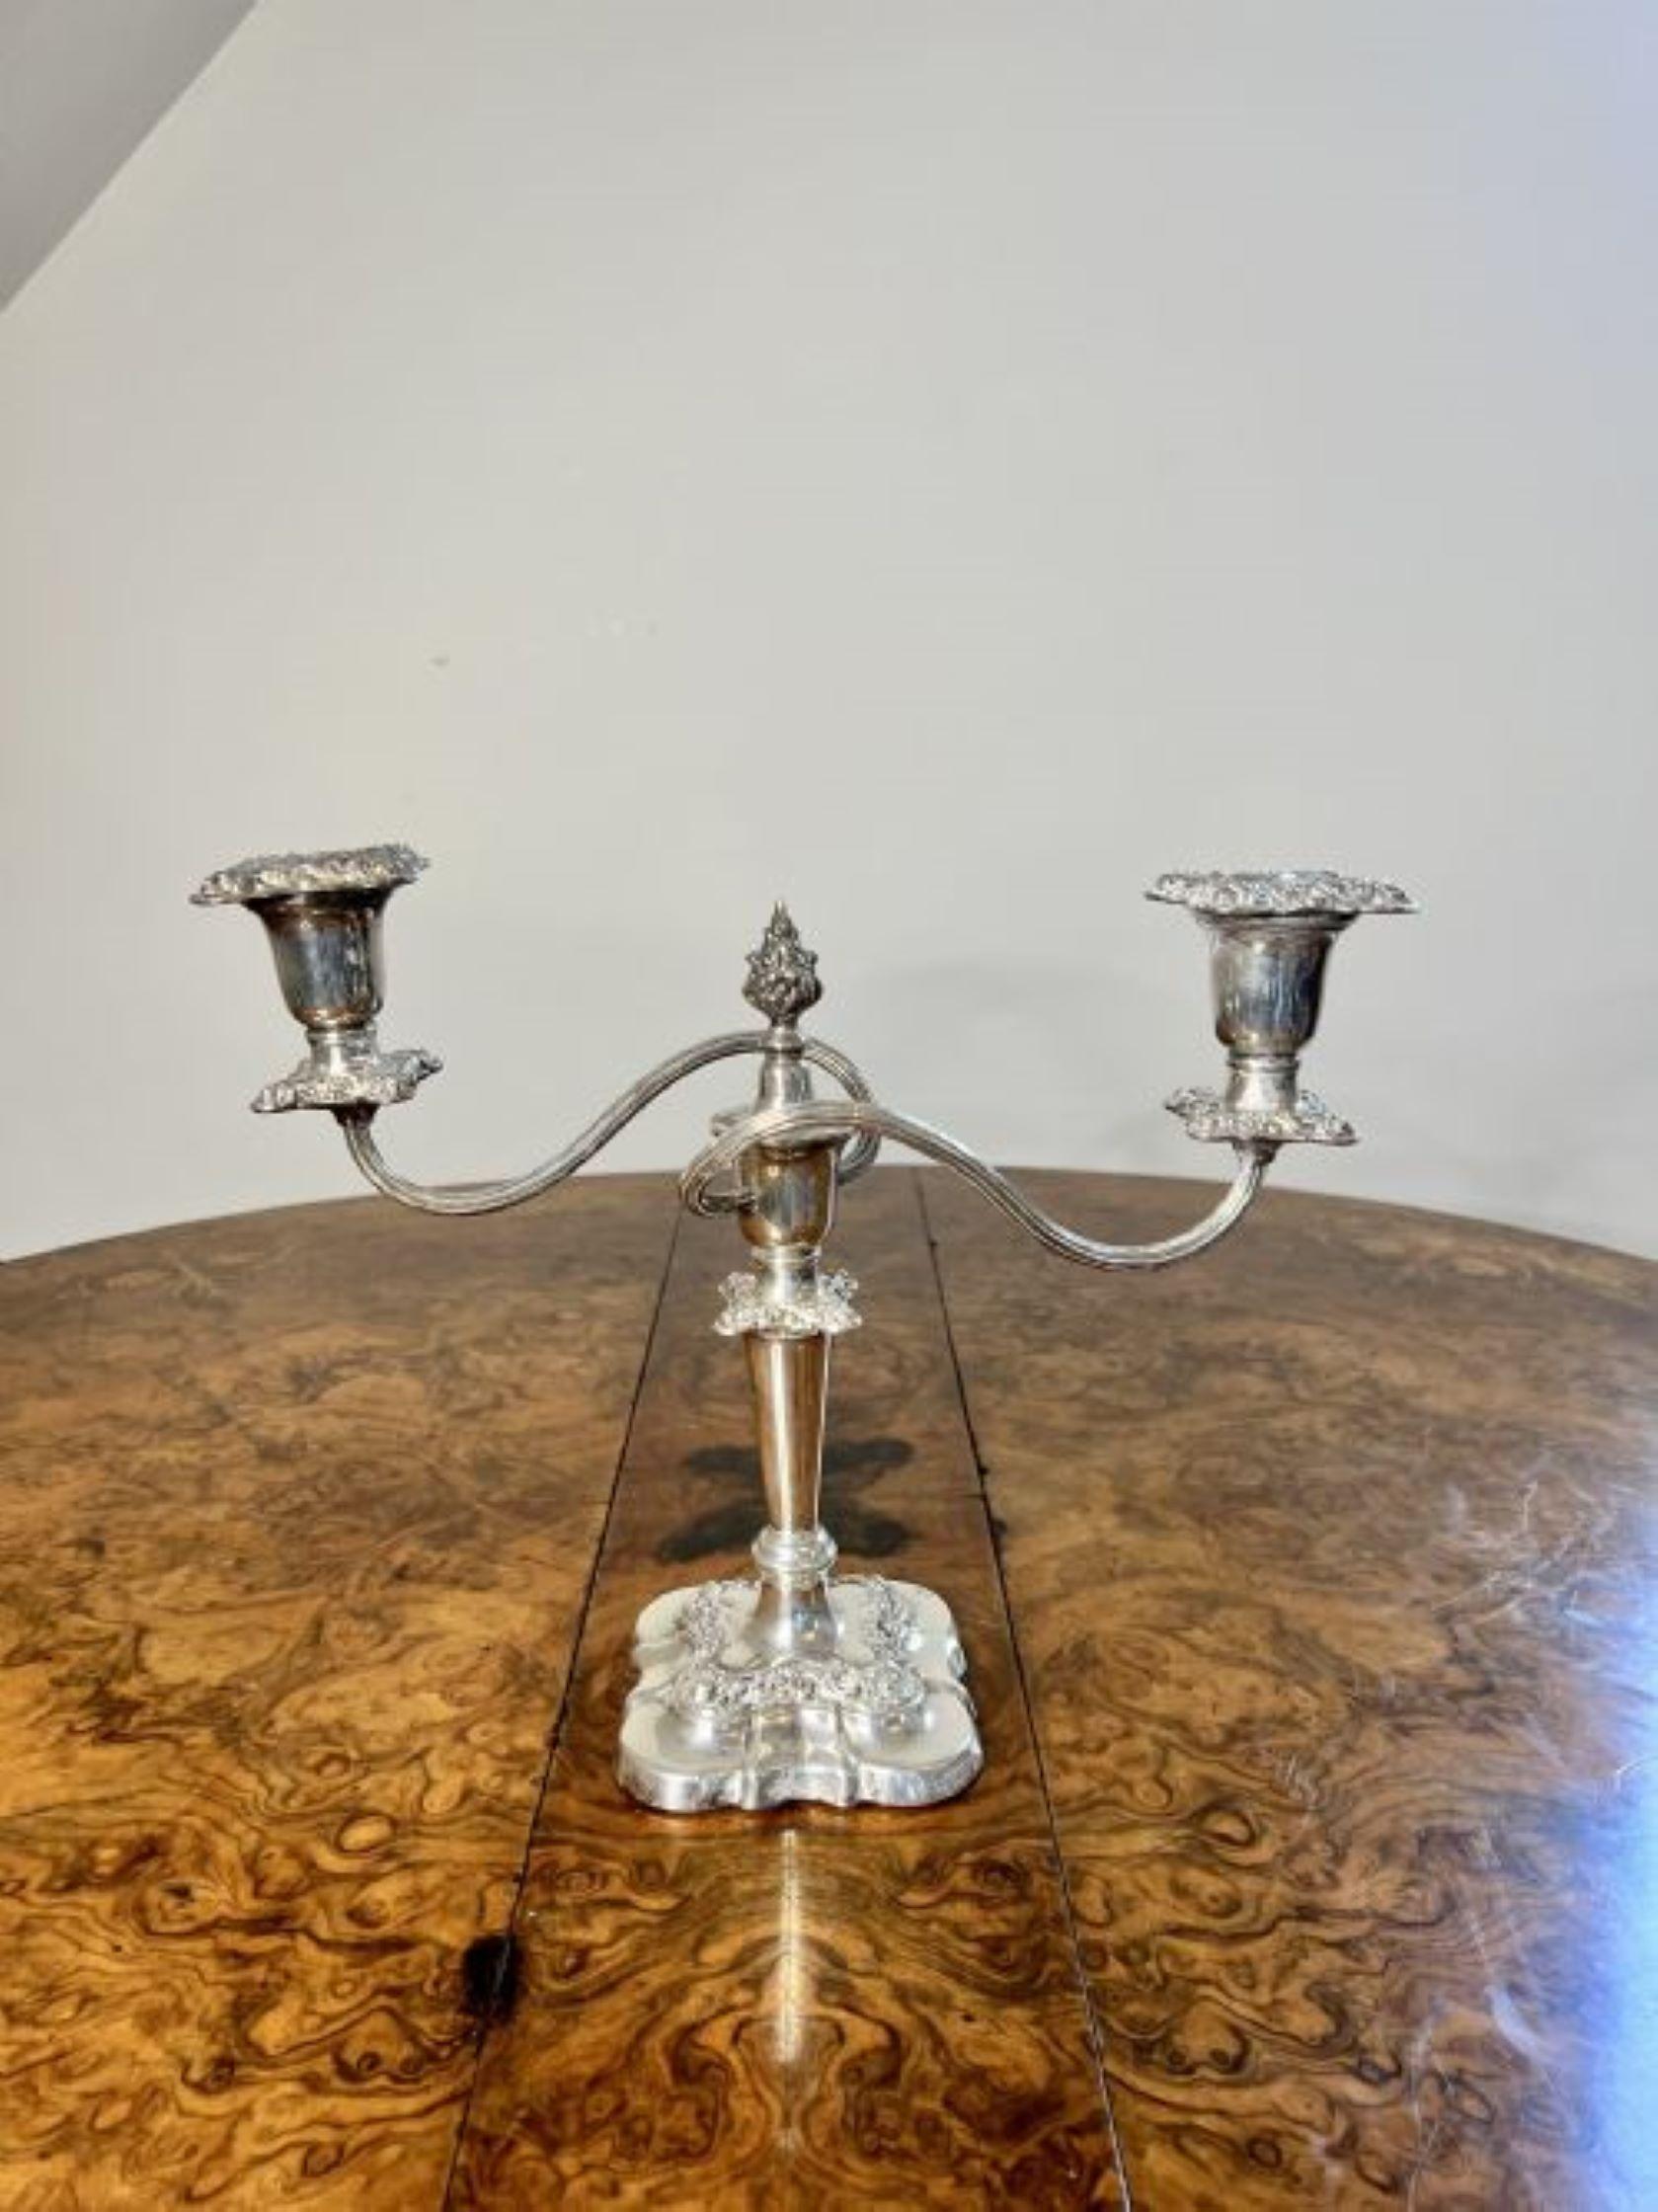 Stunning pair of antique Edwardian silver plated ornate candelabras having a stunning pair of antique Edwardian silver plated candelabras with two light branches above a shaped column standing on square ornate bases.